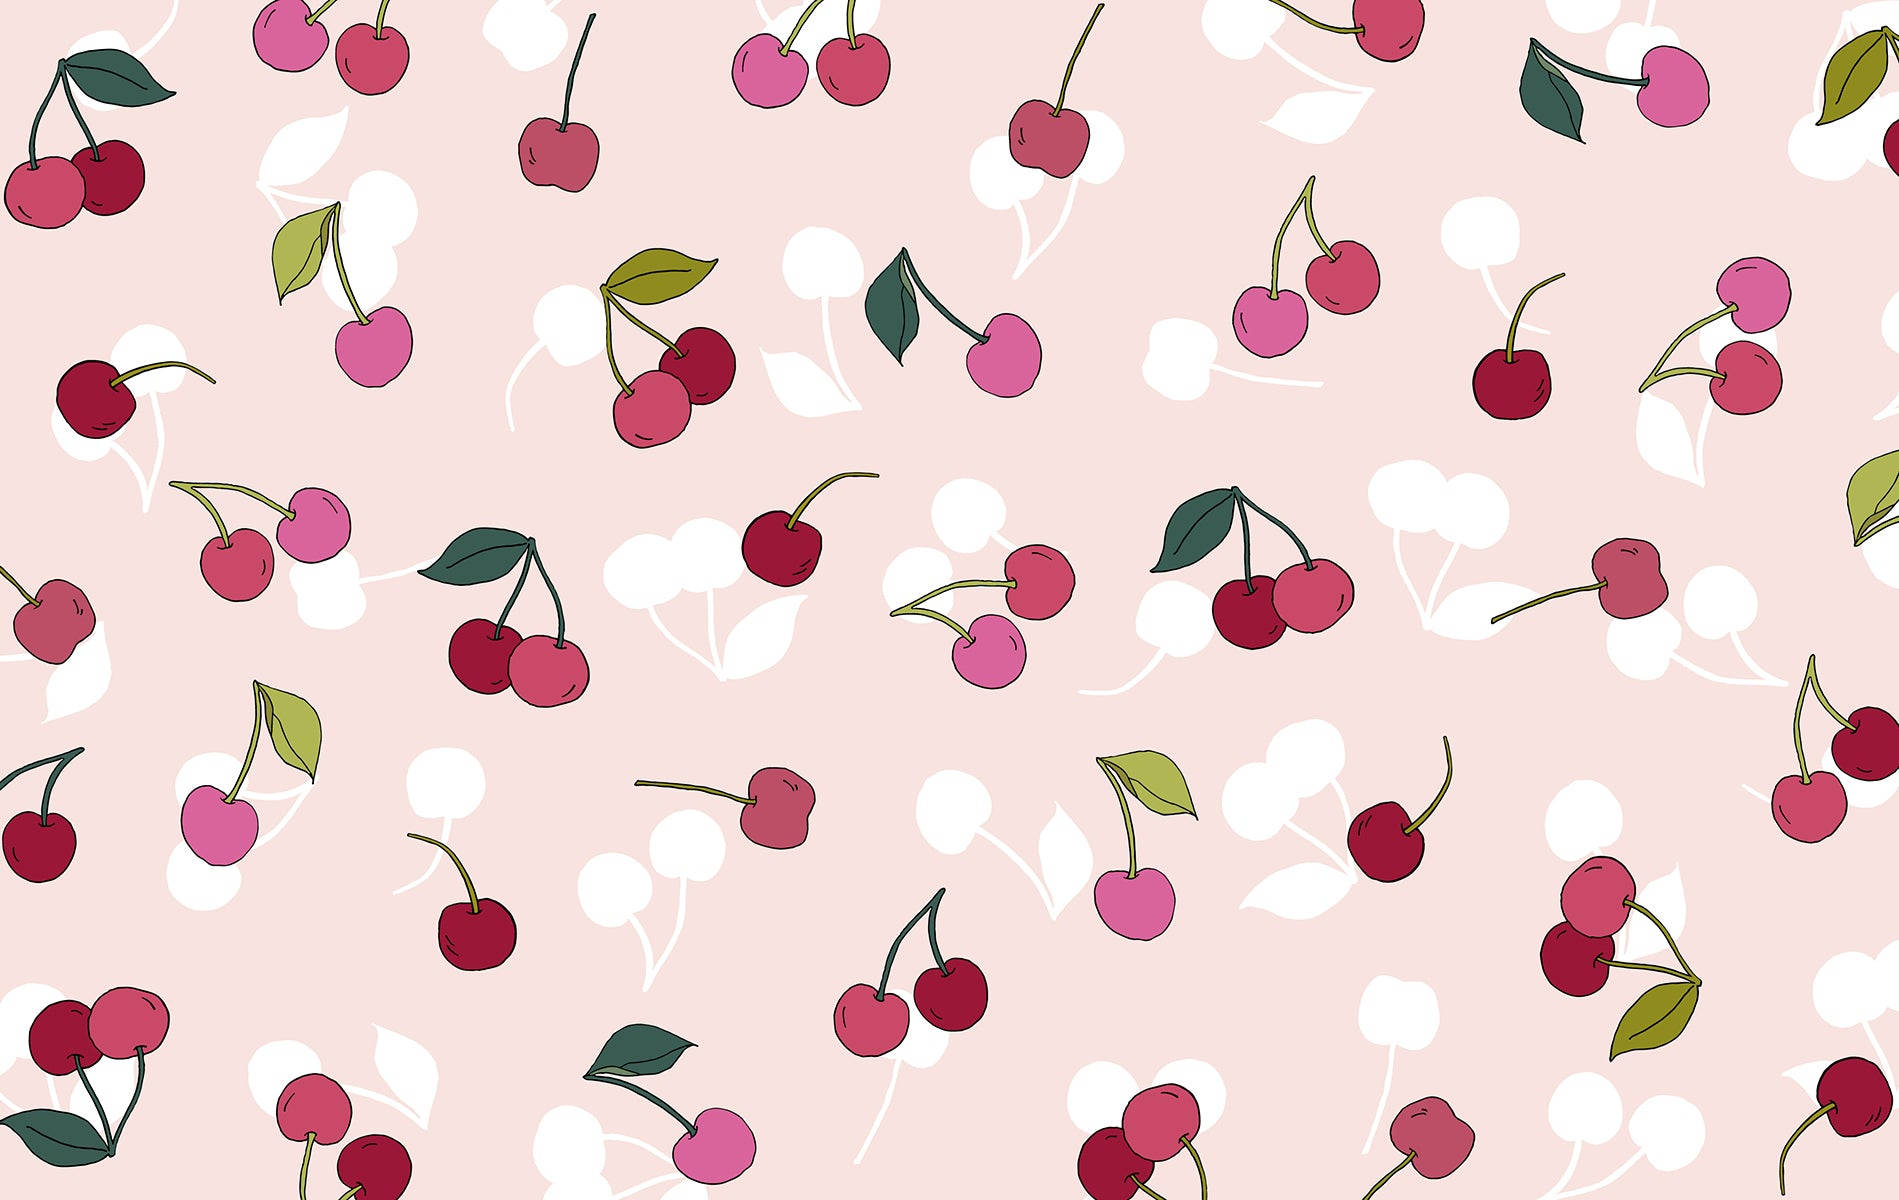 100+] Cute Cherry Aesthetic Wallpapers | Wallpapers.com